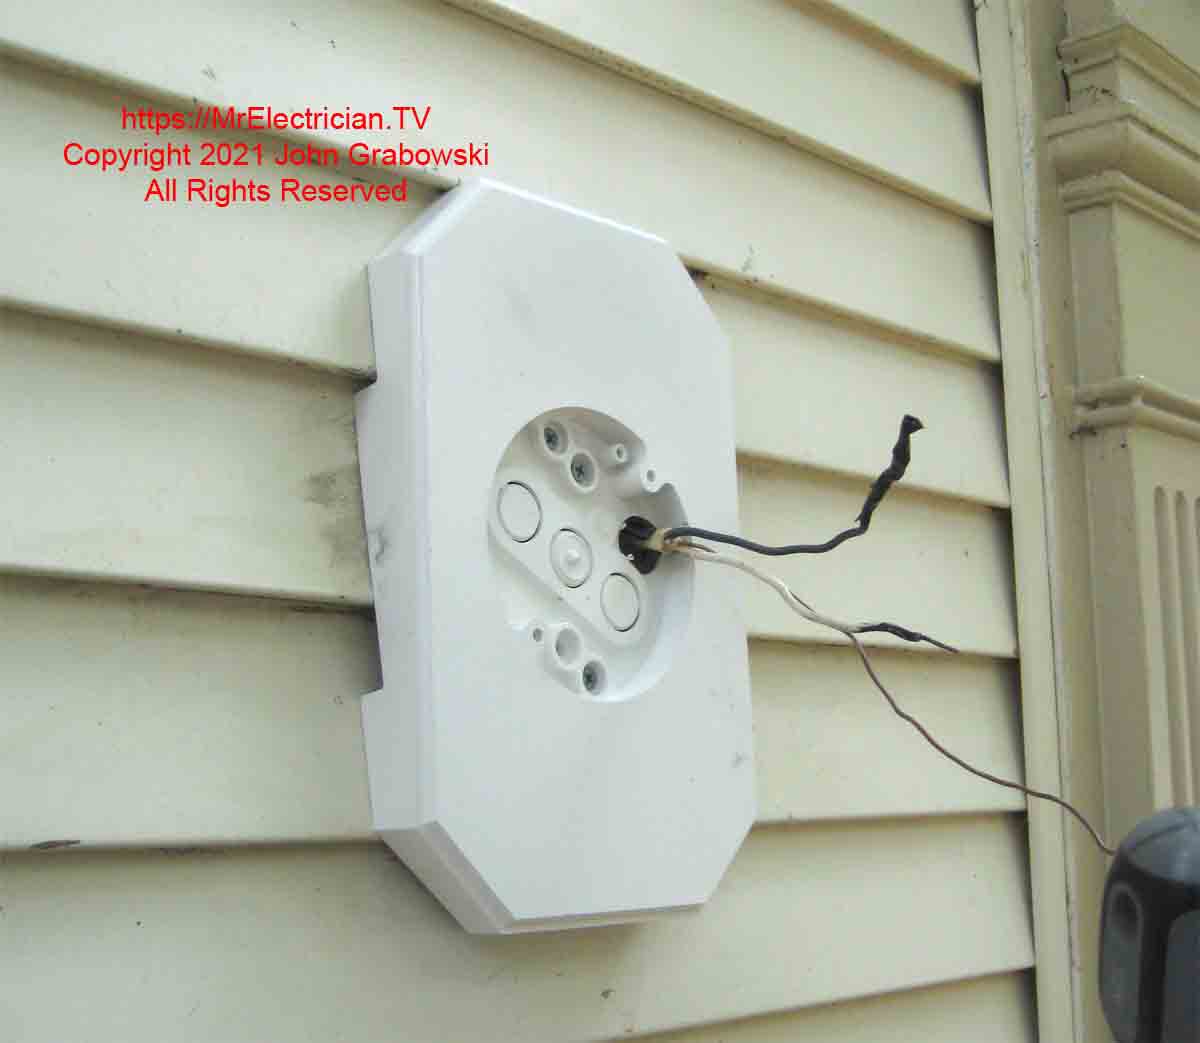 A siding box is used to mount an outdoor light fixture on vinyl siding